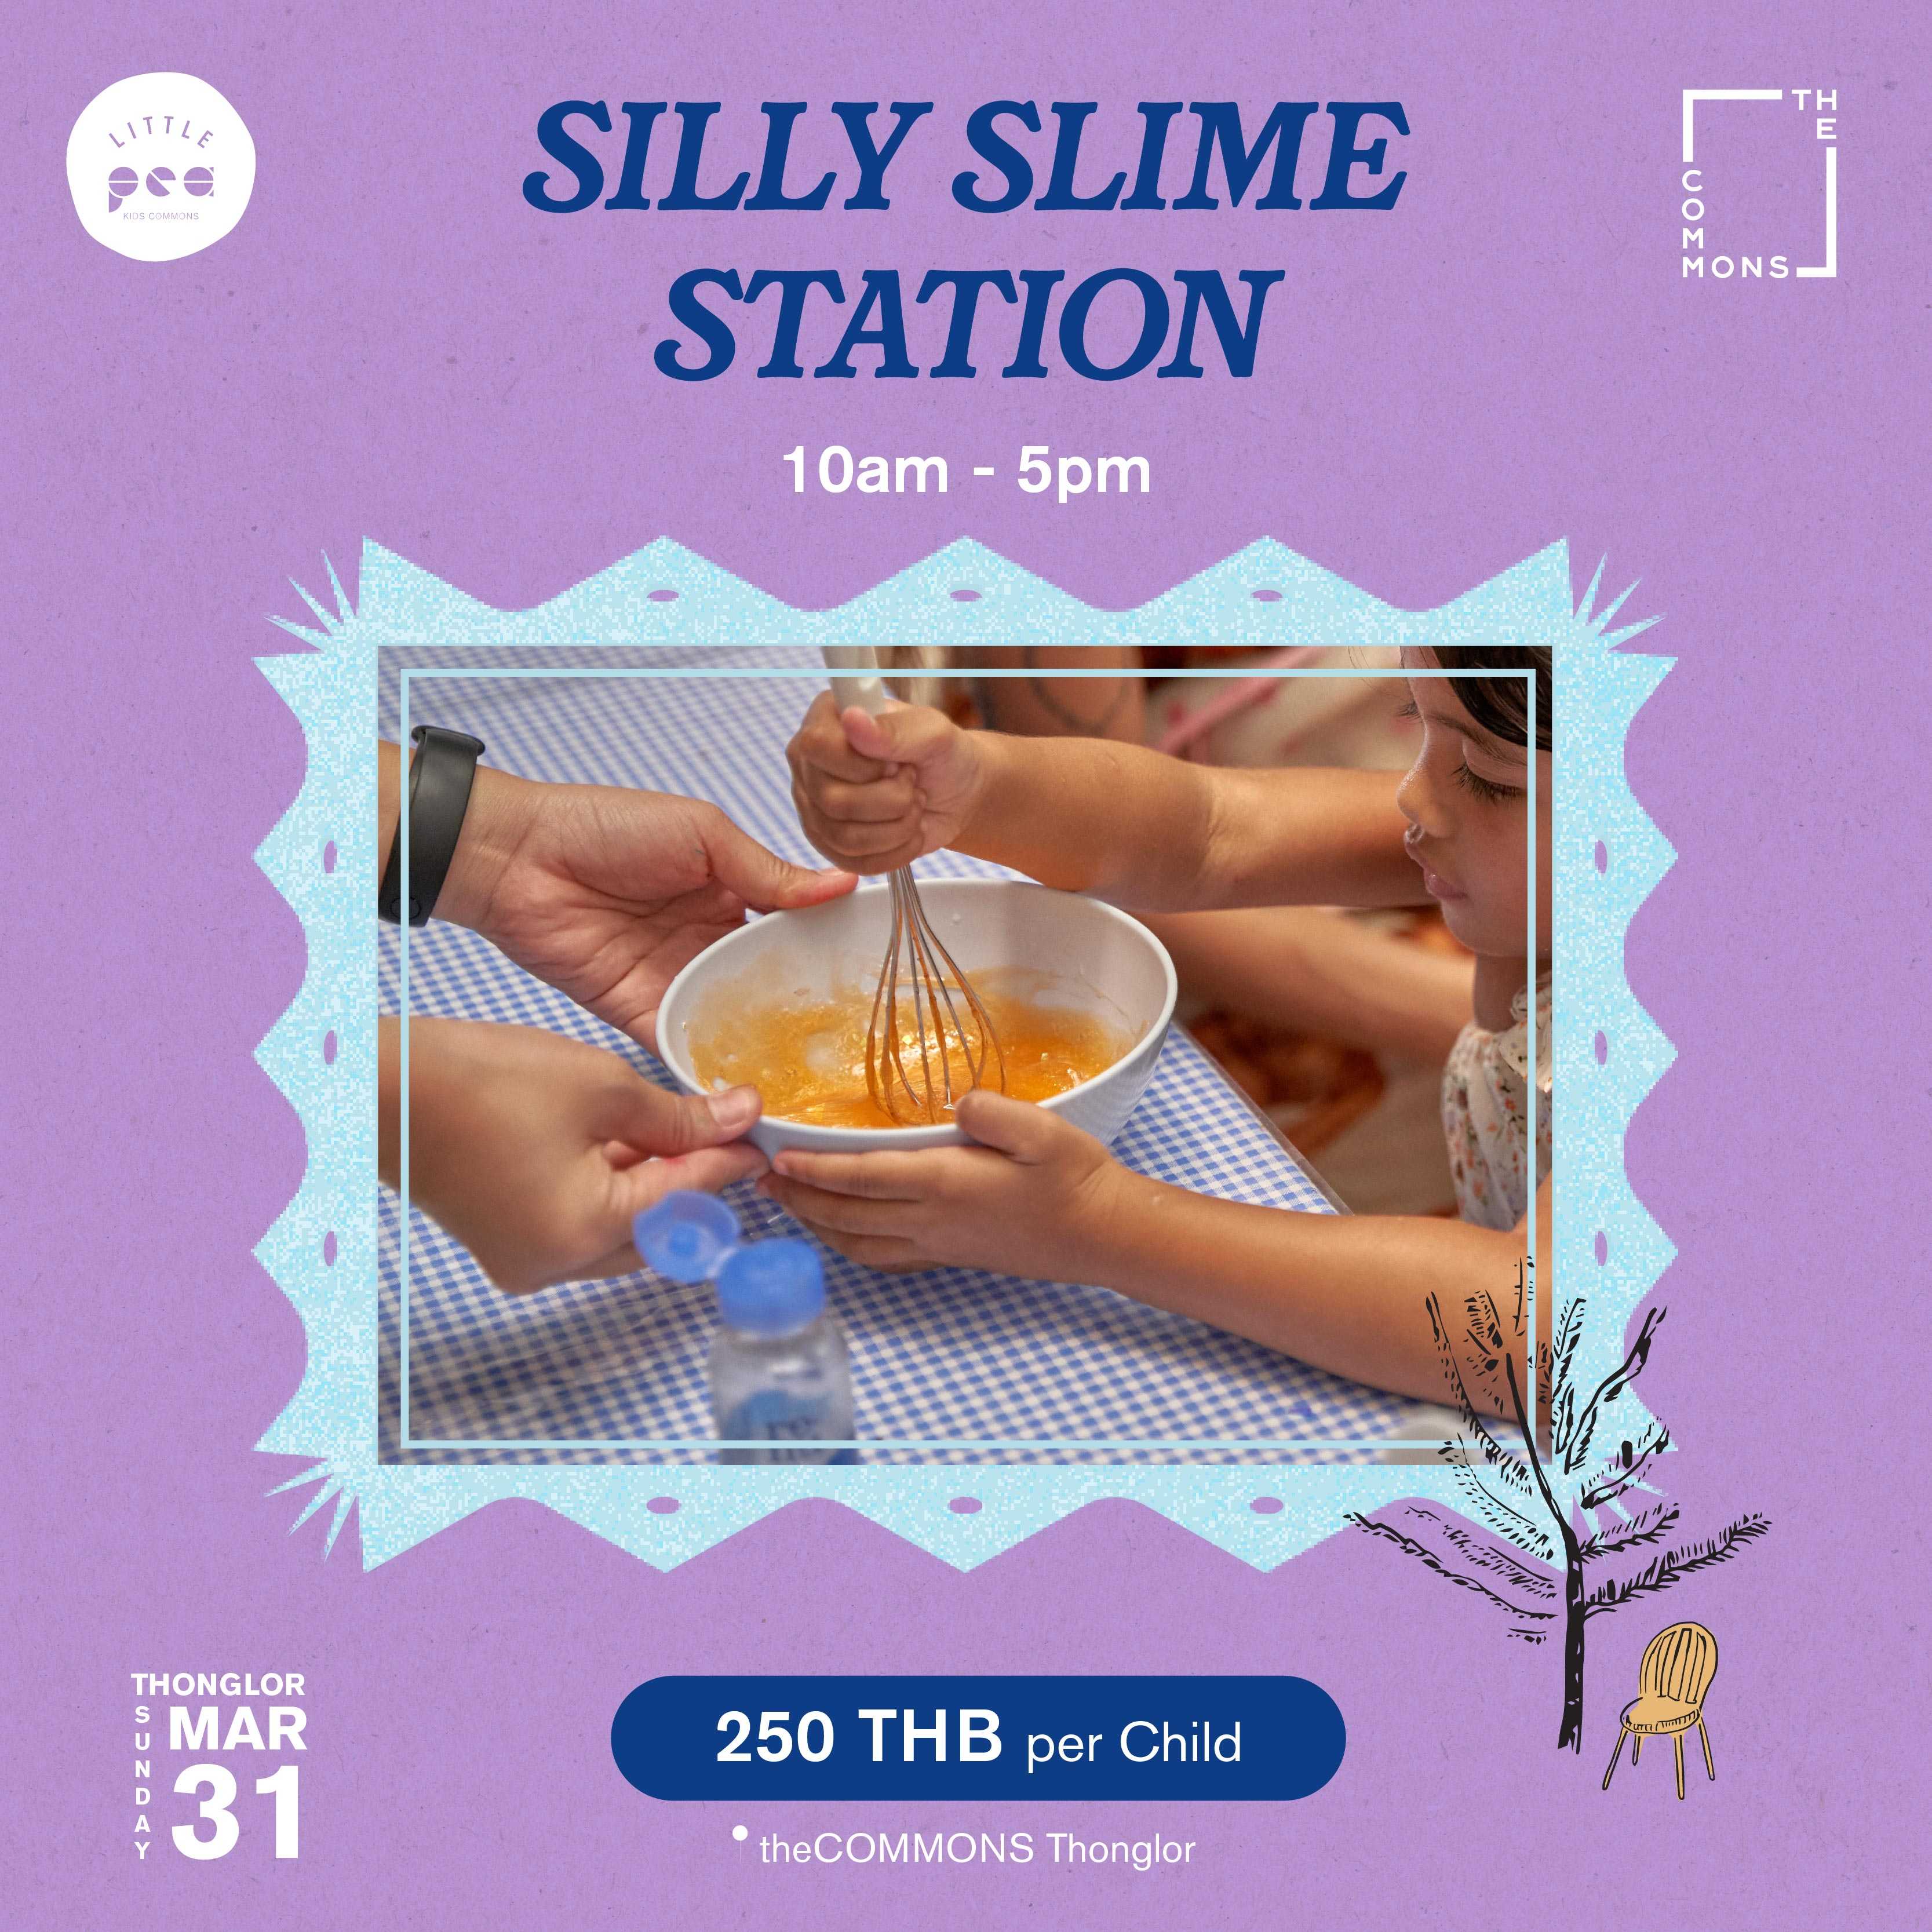 Silly Slime Station